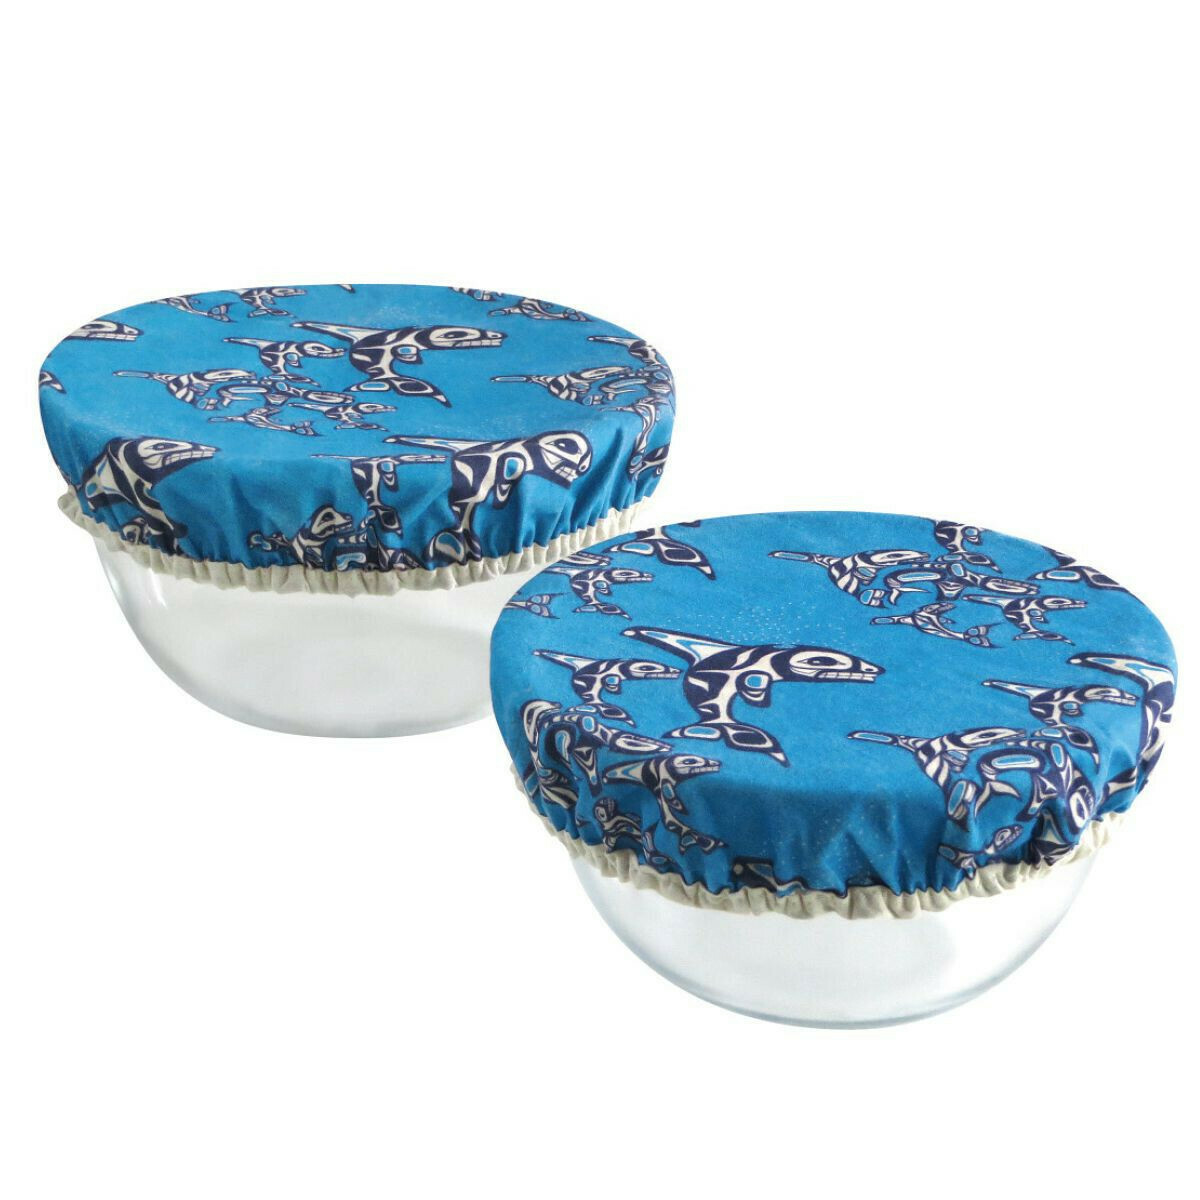 Set of 2 Reusable Bowl Covers